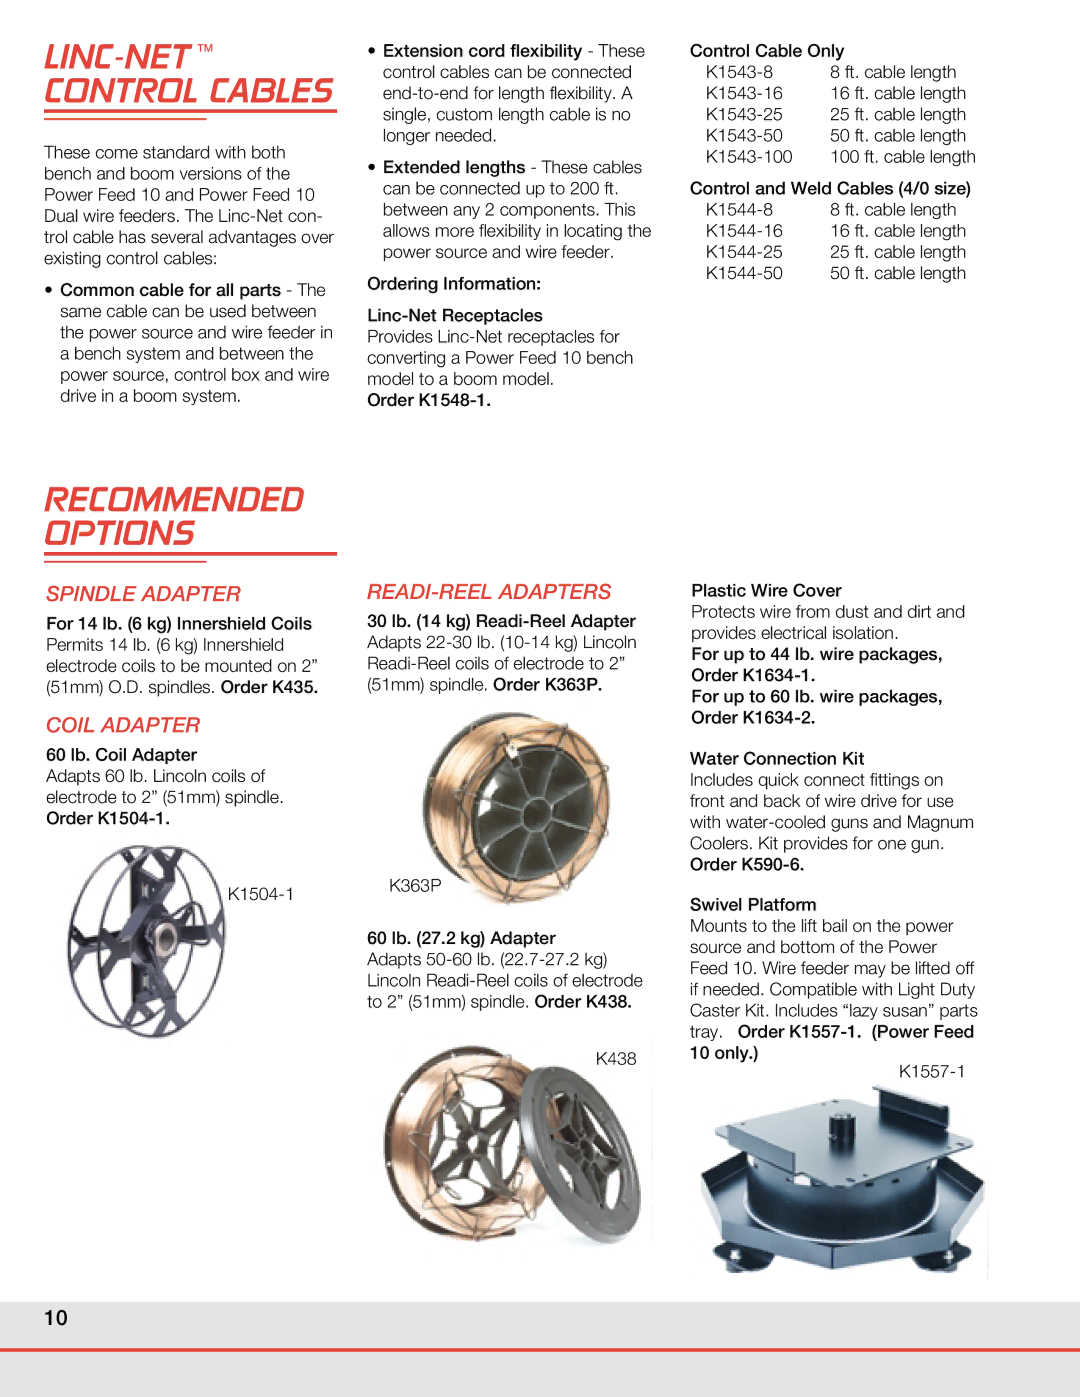 Lincoln Electric WELDING SYSTEMS manual LINC-NET TM Control Cables, Recommended Options 